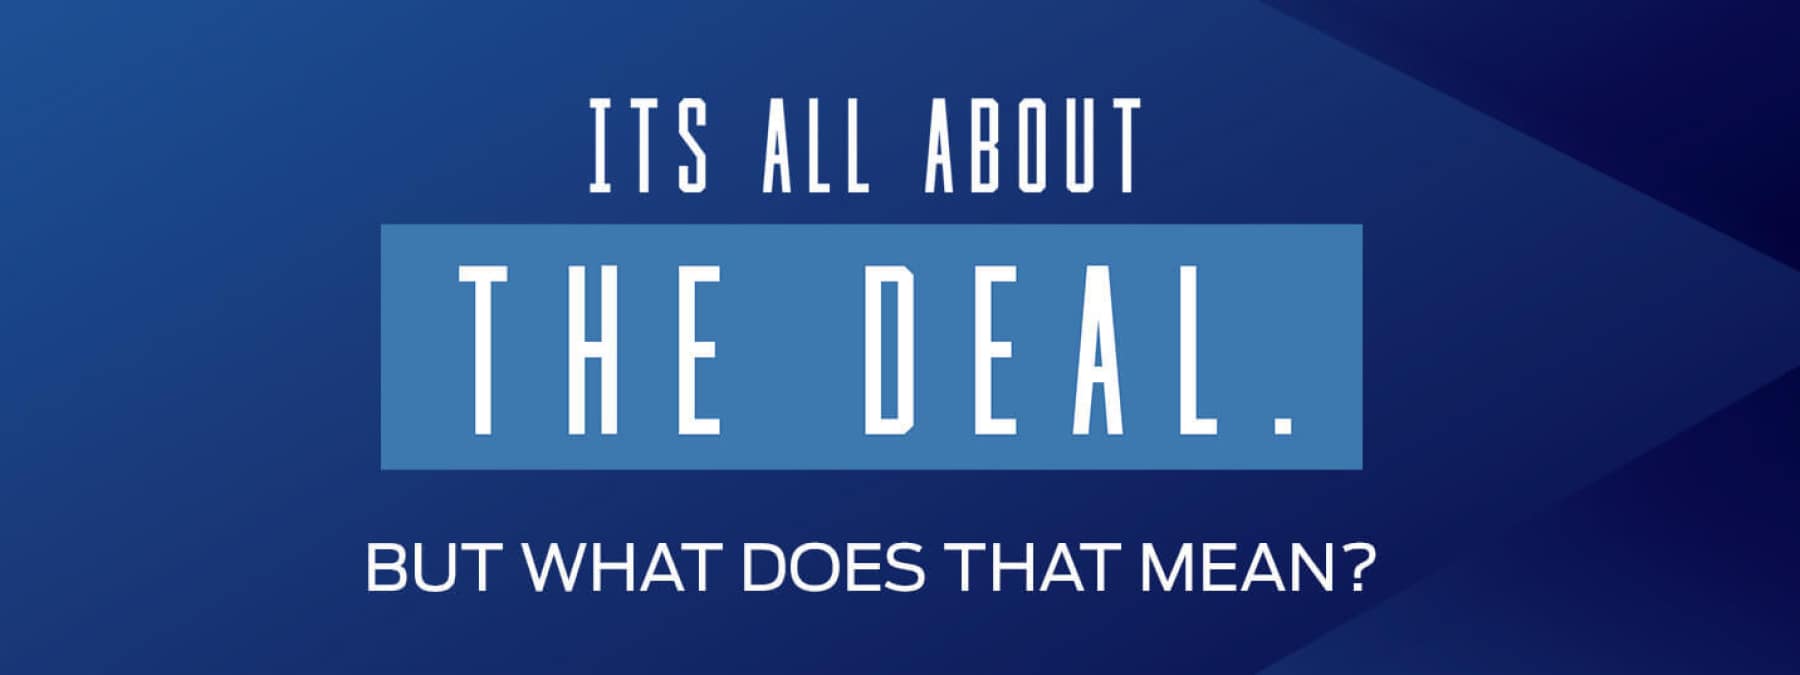 Its All About The Deal desktop banner